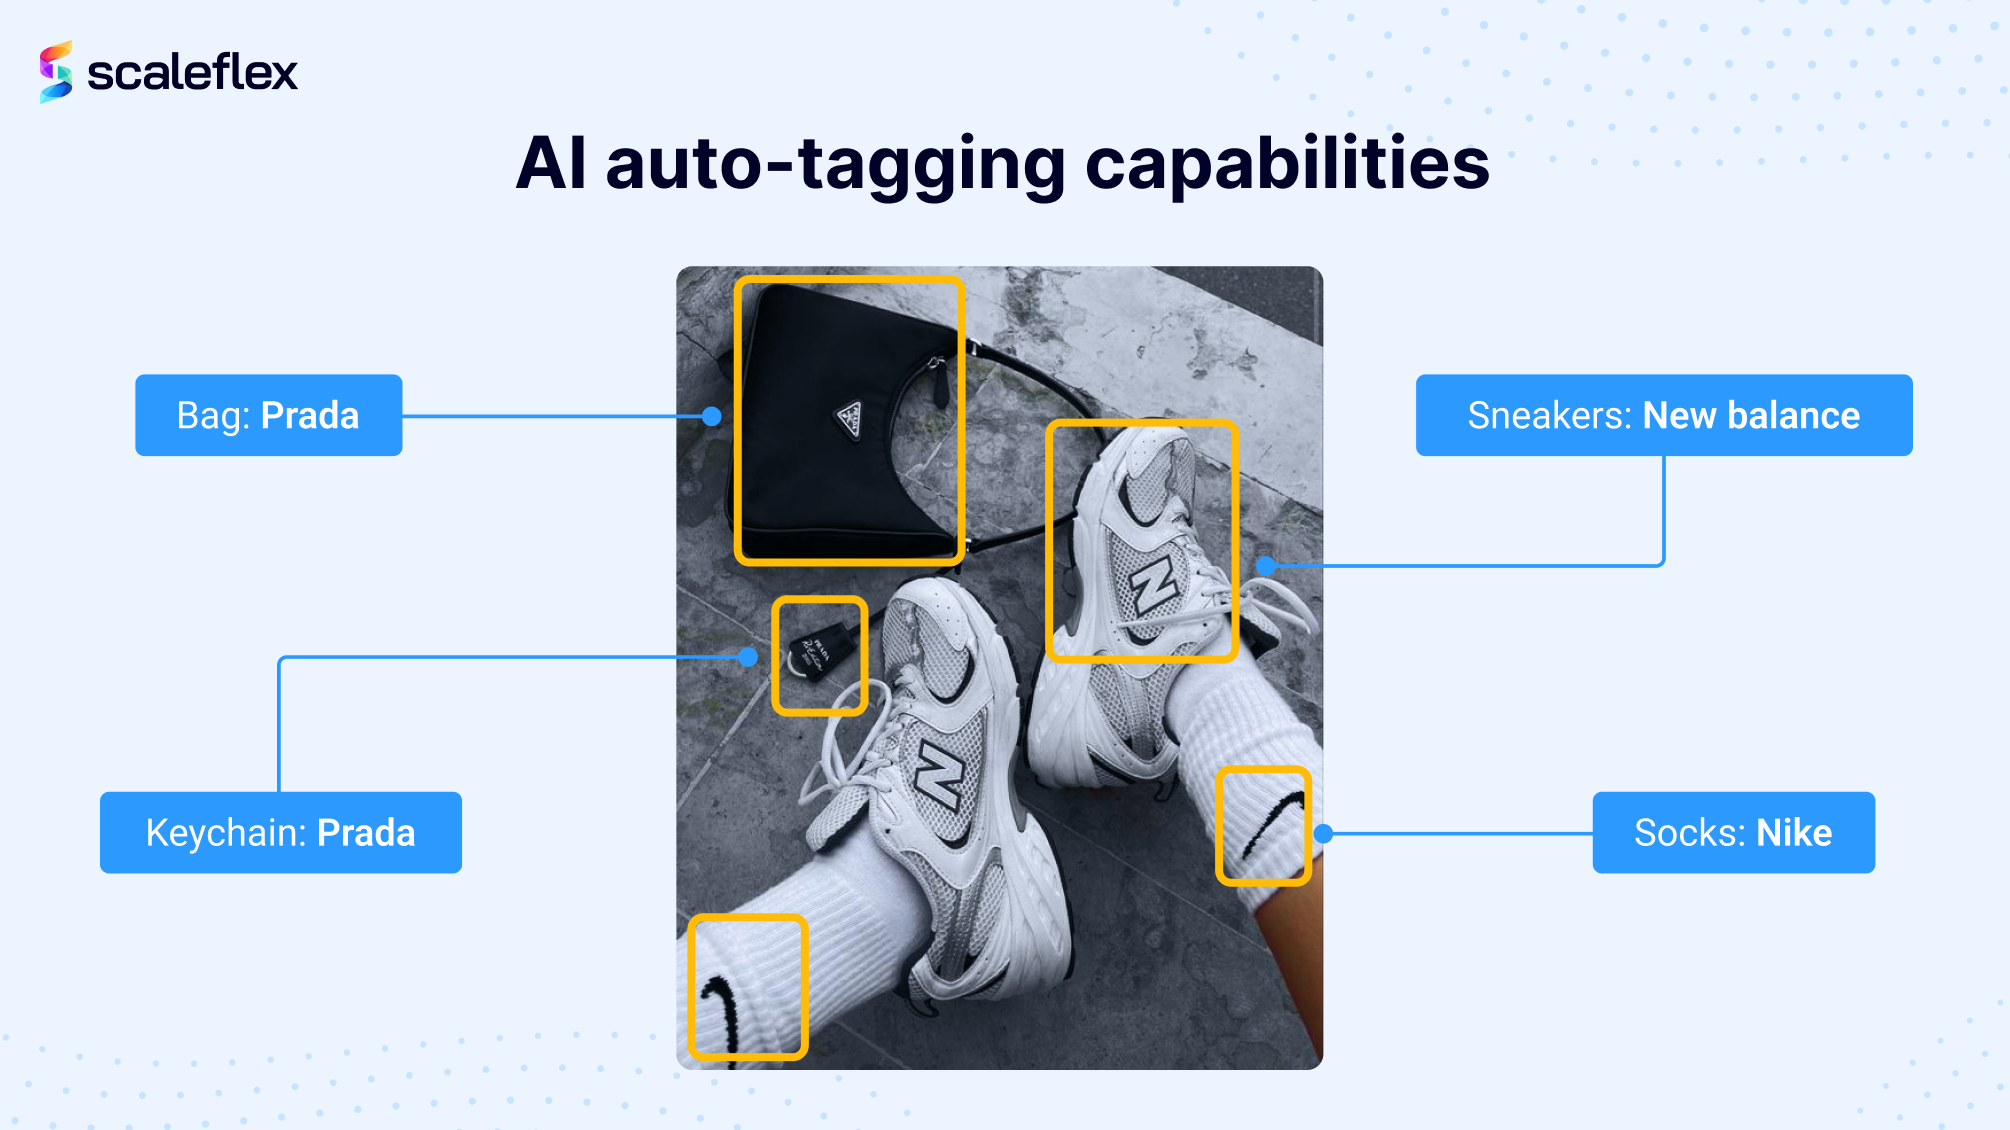 AI auto-tagging in E-commerce recognizes items like bag, sneakers, keychain in an image